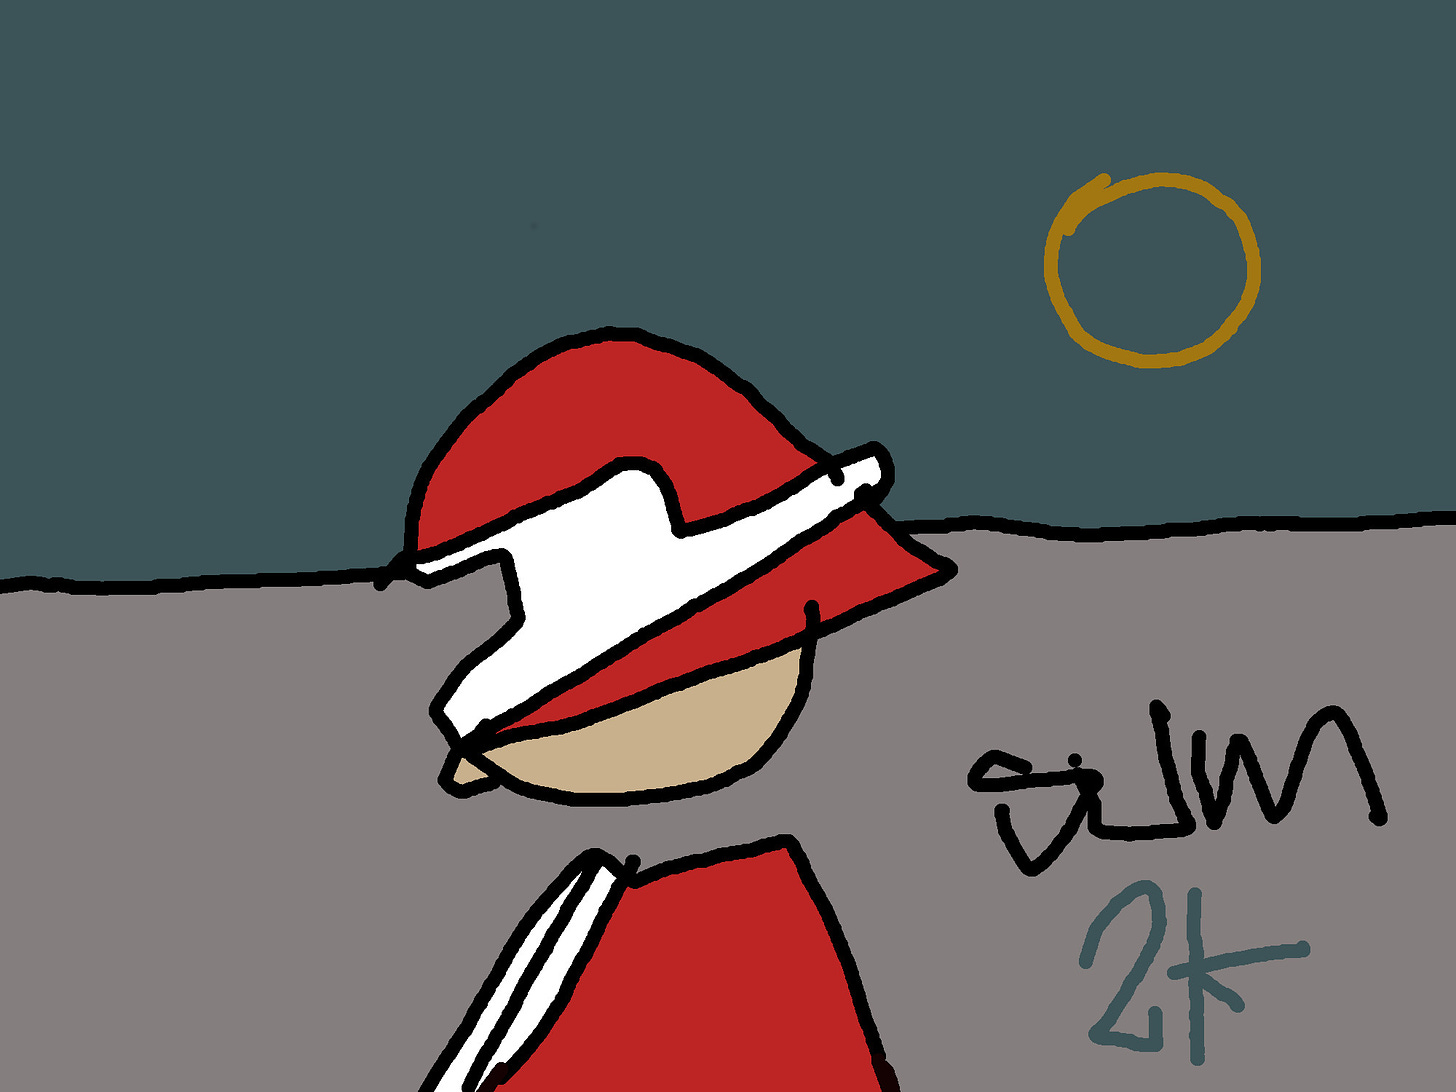 Digital drawing. Two rectangles divided by a wiggly black line, muted grey-green on top, light grey at the bottom, where handwriting reads "sum 2k". At the front, a stylized person without a neck and a floating head wears a cap and a jacket of red and white.